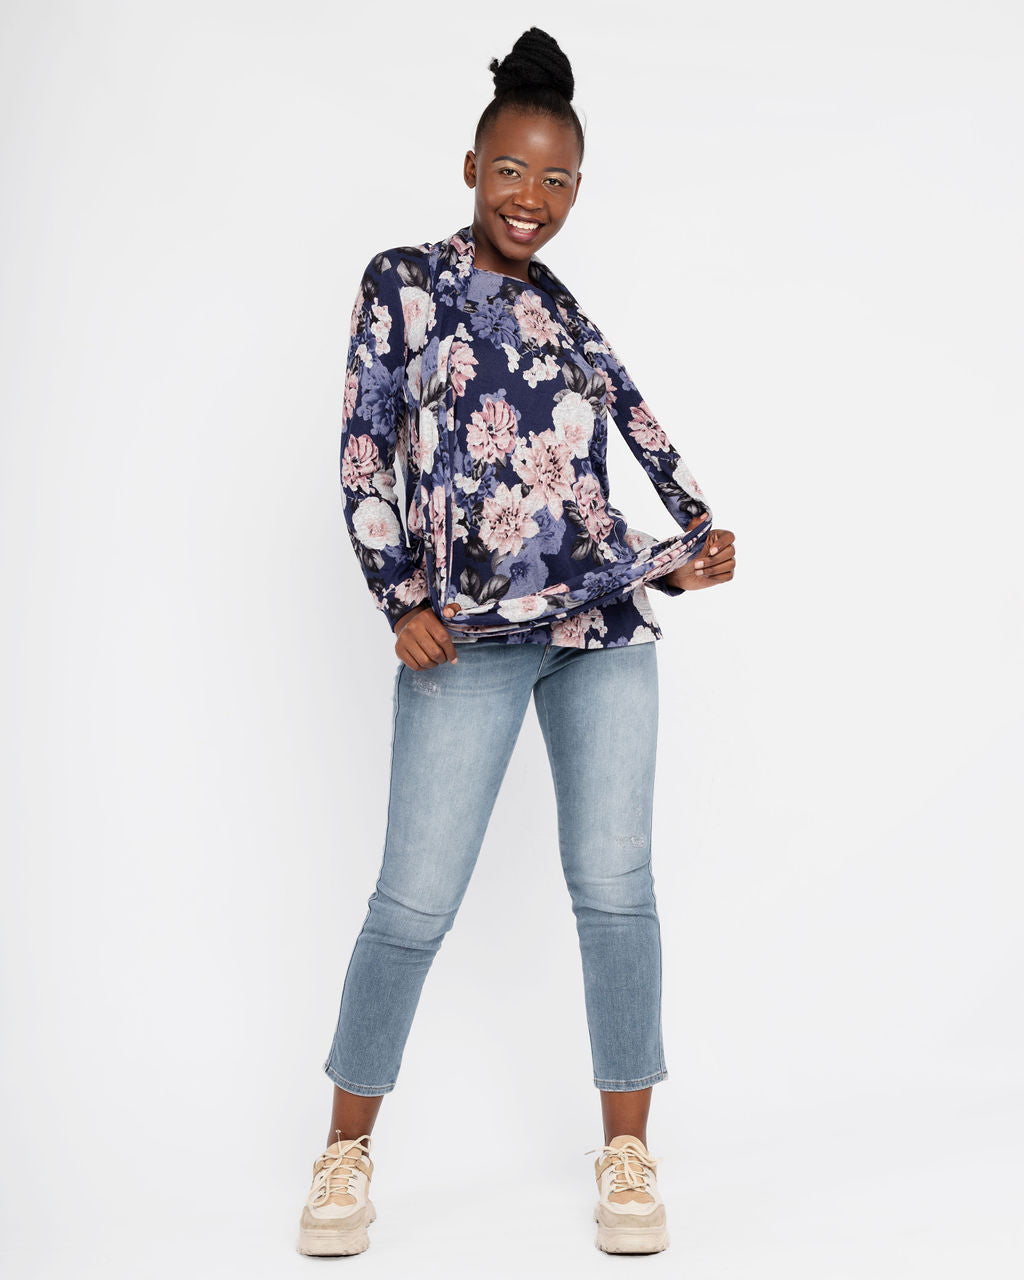 NAVY & PINK FLORAL LONG SLEEVE TOP WITH SNOOD